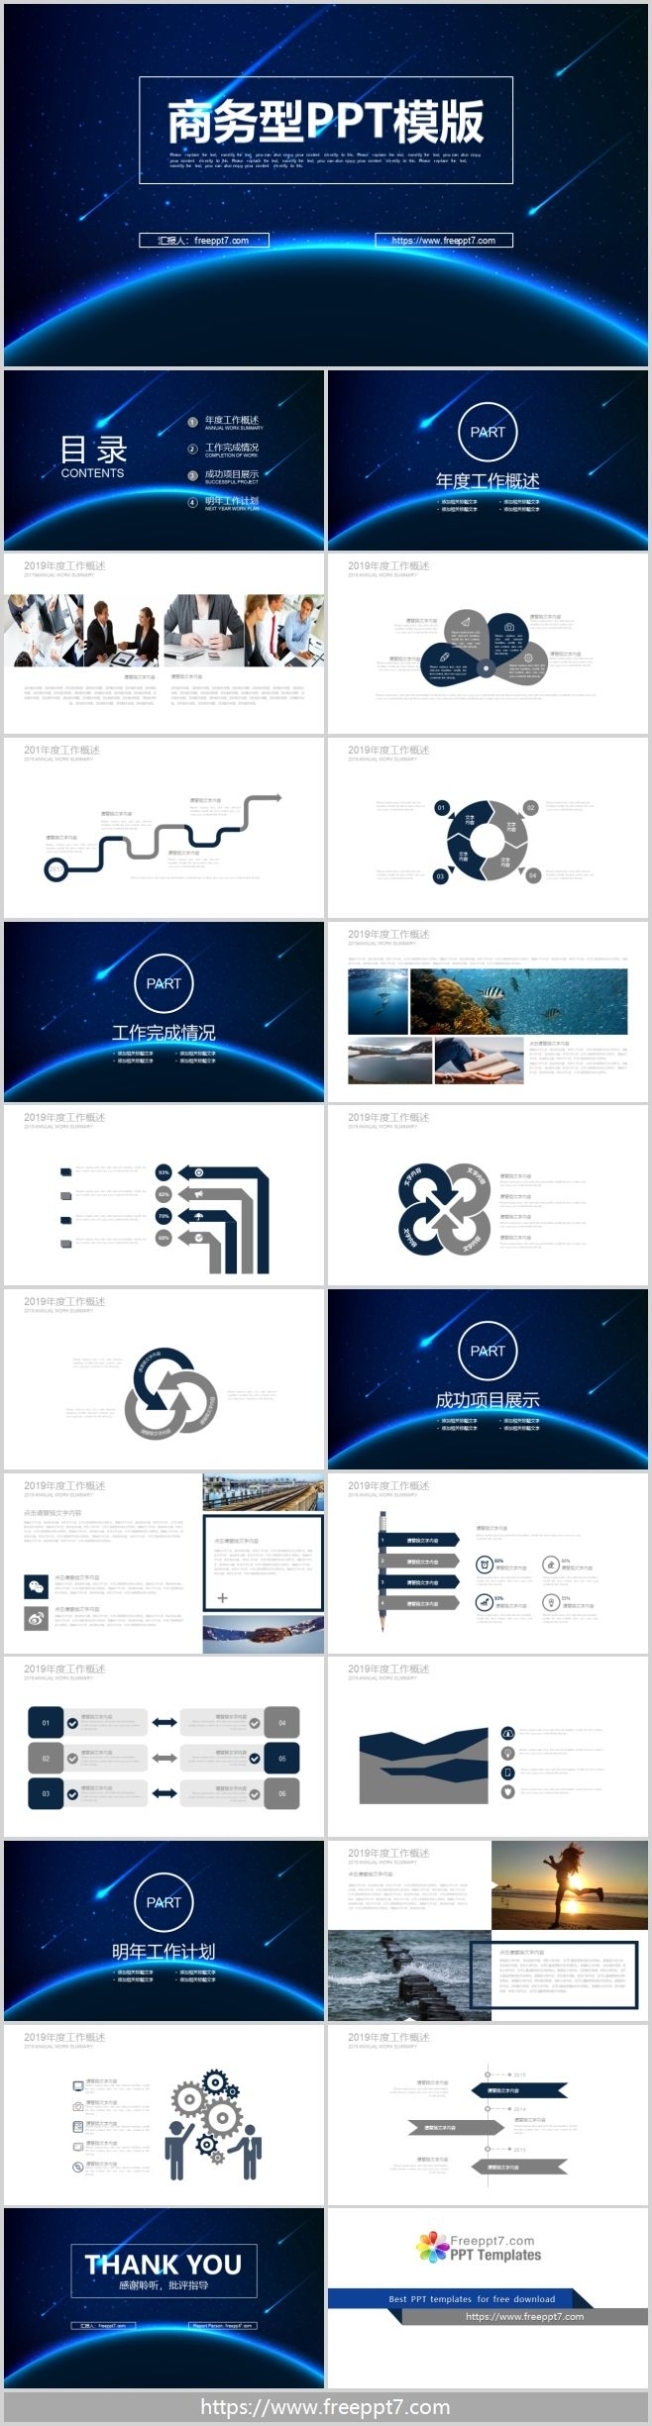 High End Business Powerpoint Templates Best Powerpoint Templates And Intended For Best Business Presentation Templates Free Download